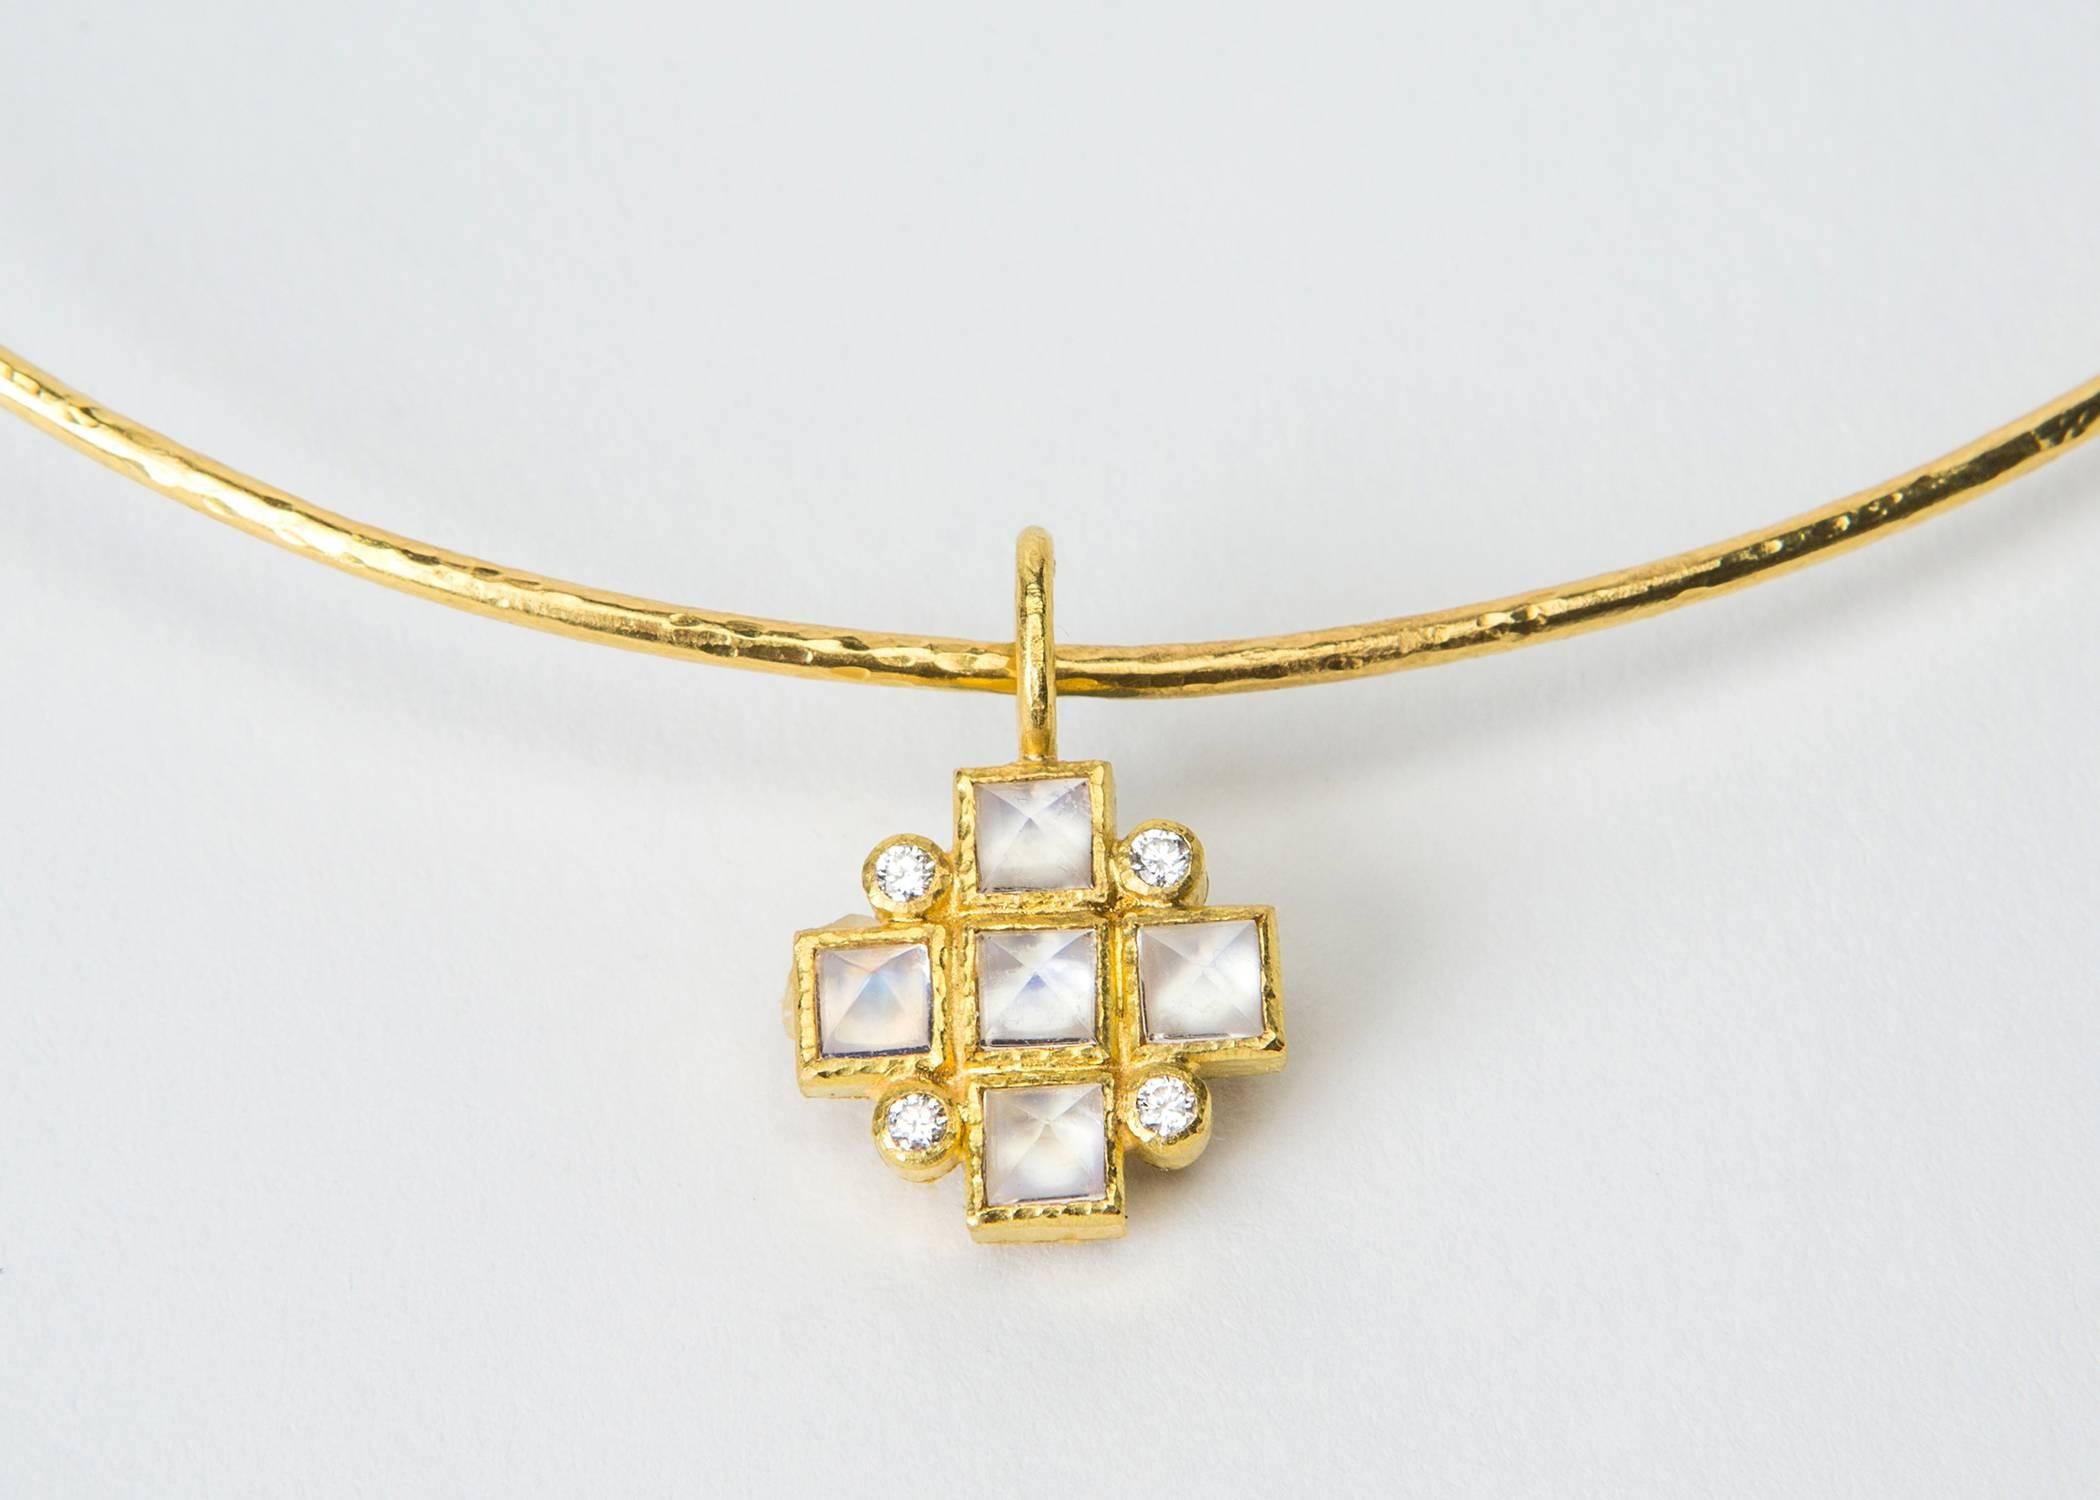 Pyramid shaped moonstones and brilliant cut diamonds create a classic maltese cross pendant suspended from a simple neck wire. Simple wearable style from Elizabeth Locke. The pendant is just under 1 inch in length,